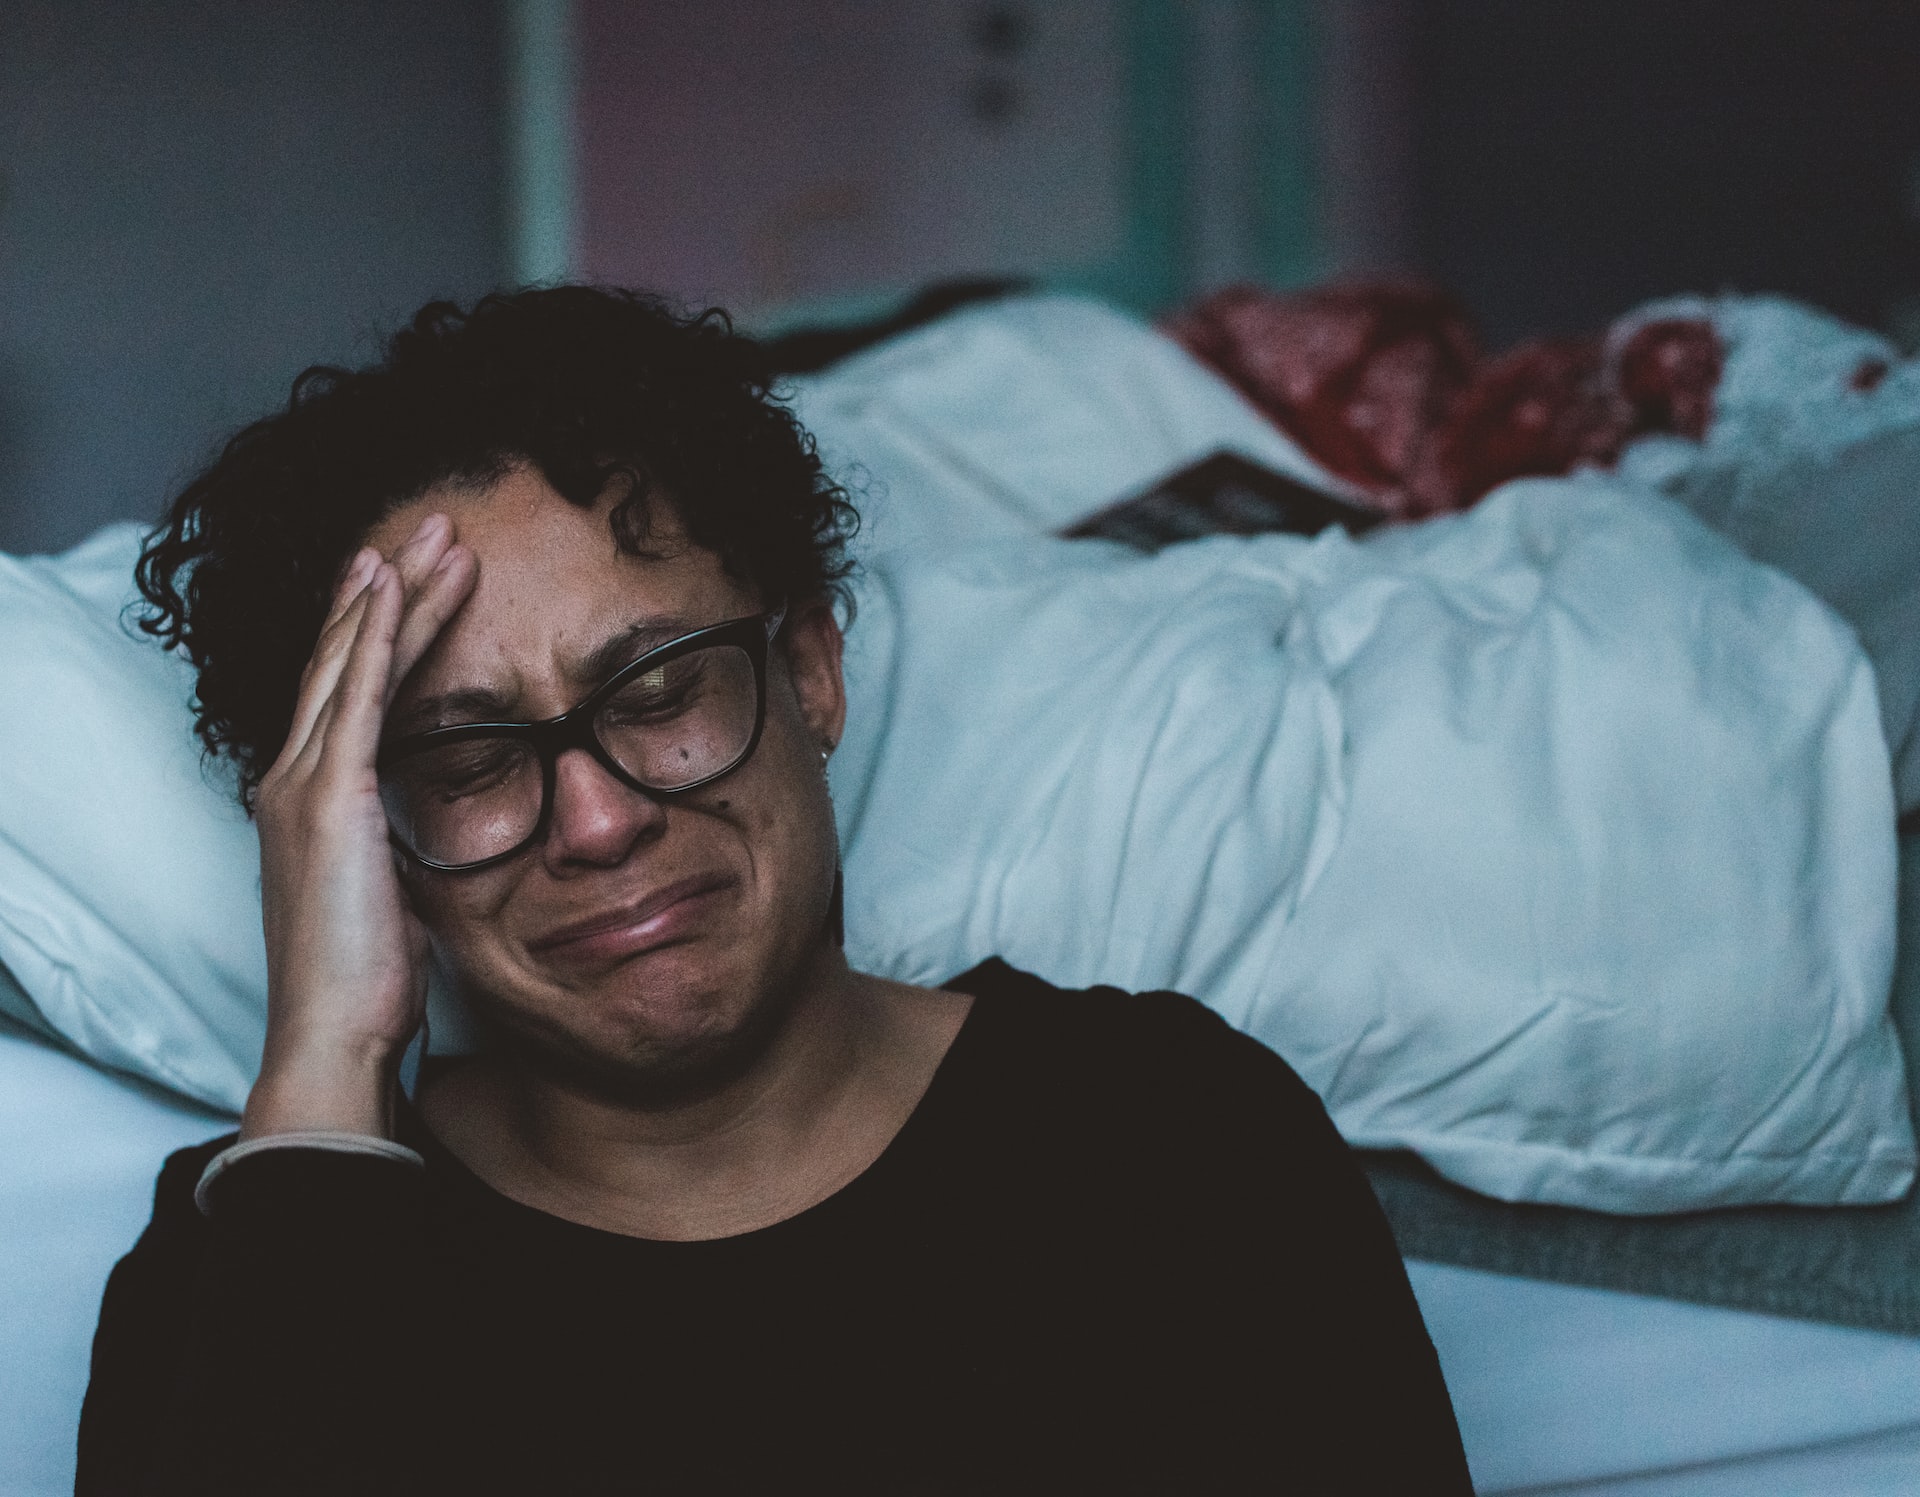 A woman wearing an eyeglass sitting on the floor beside her bed crying